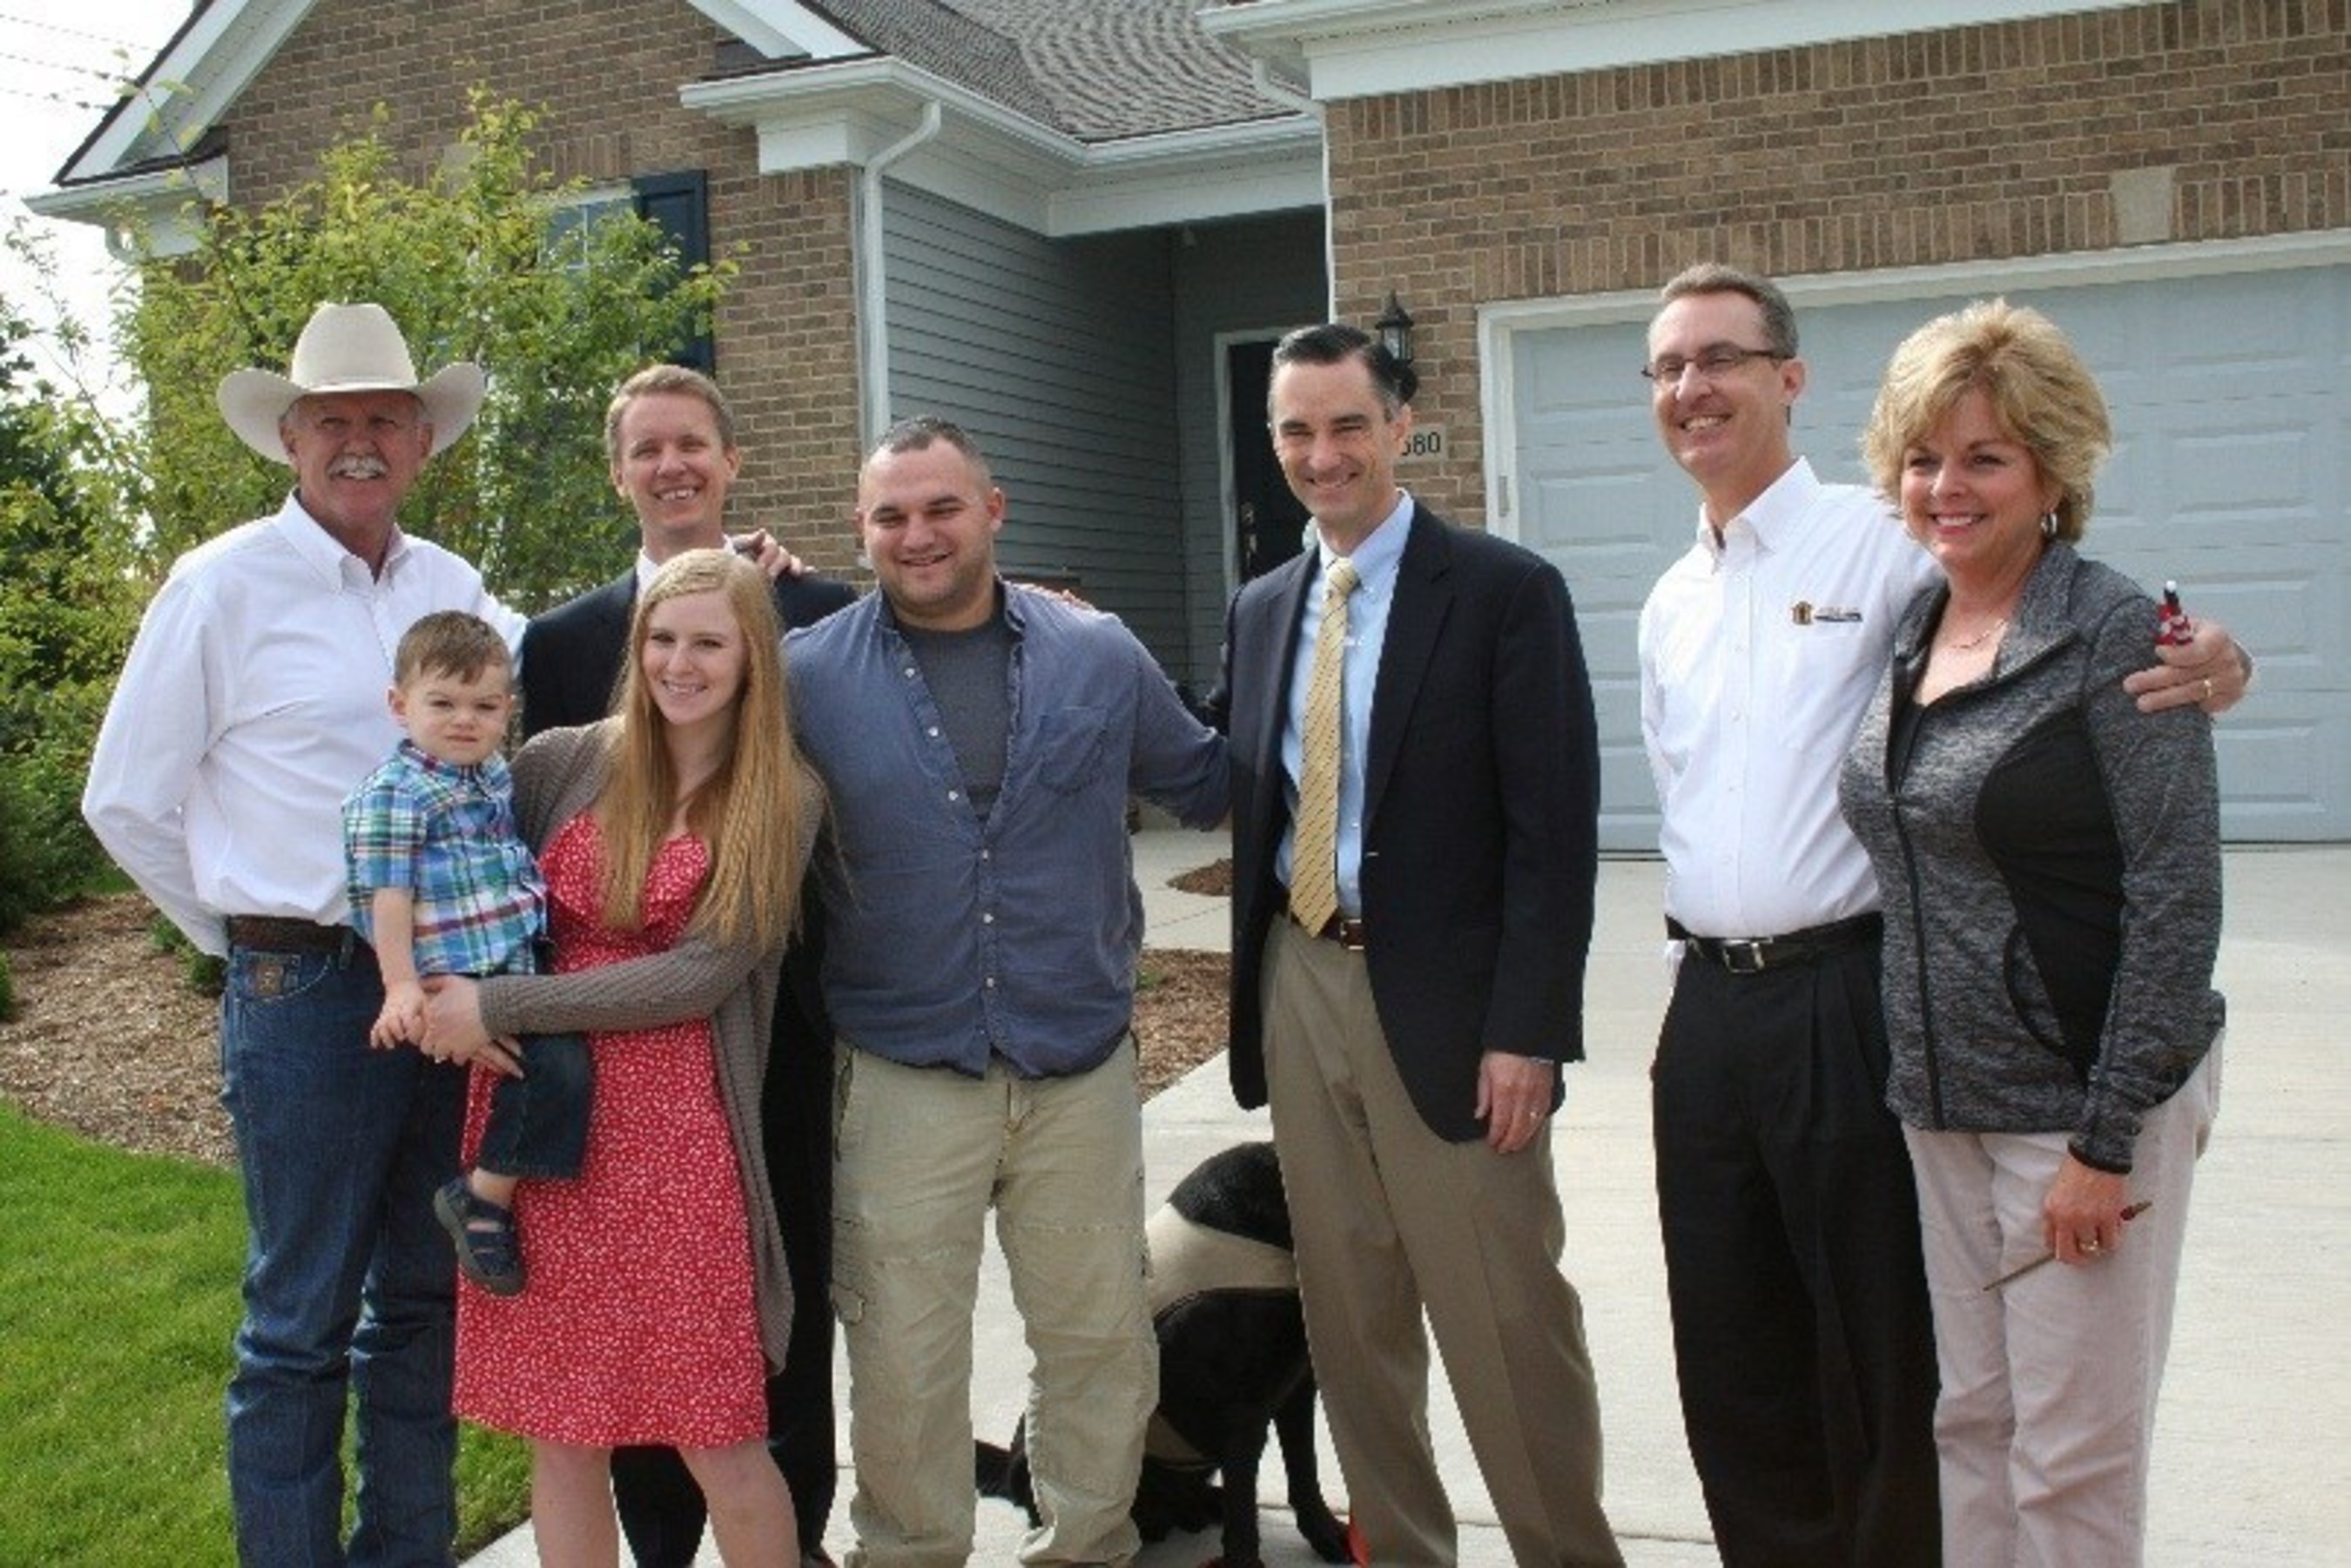 PulteGroup CEO Richard Dugas (3rd from right) at a home delivery in Michigan, one of 20 Built to Honor homes to be gift to deserving veterans and their families in 2014.